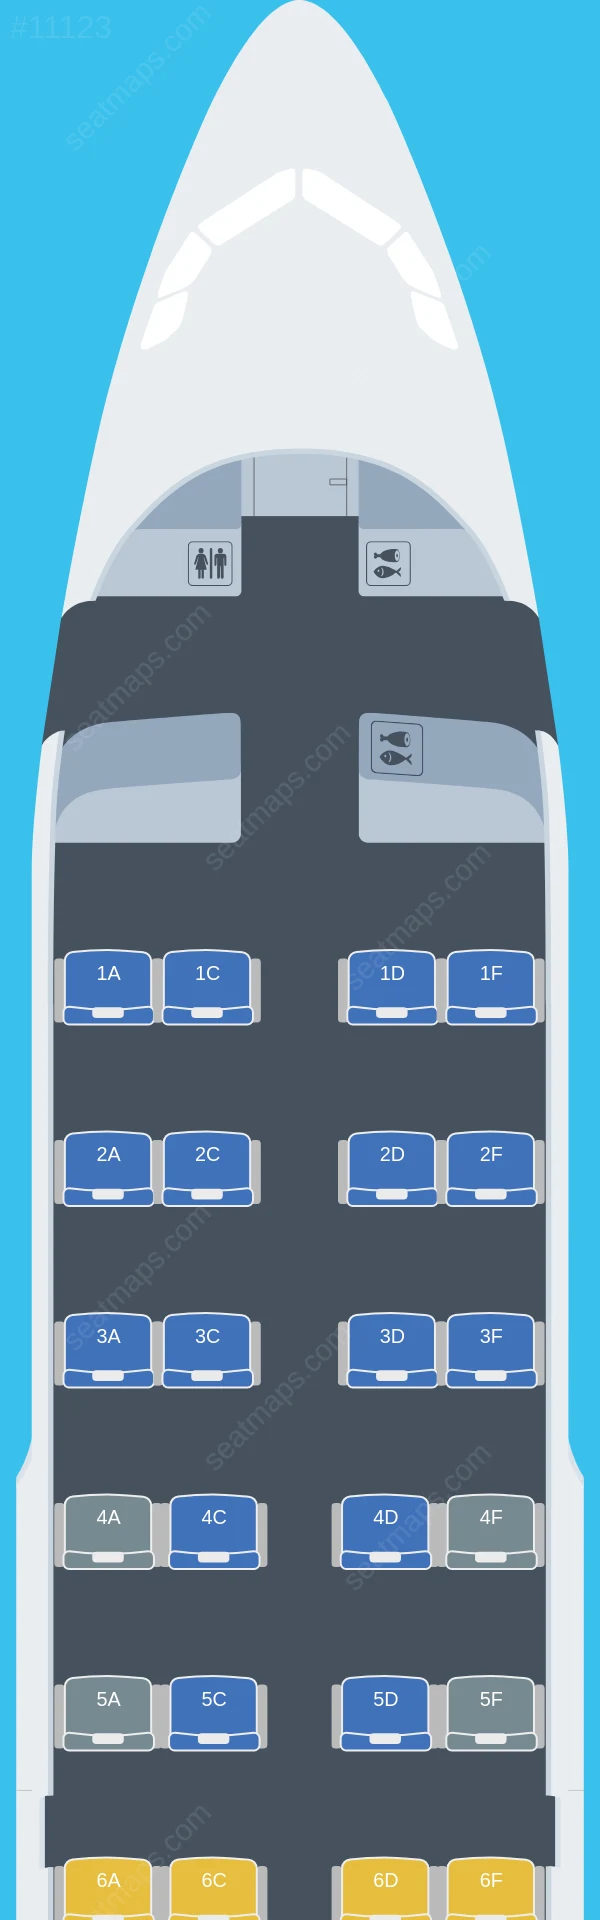 Skytraders Airbus A319-100 seatmap preview